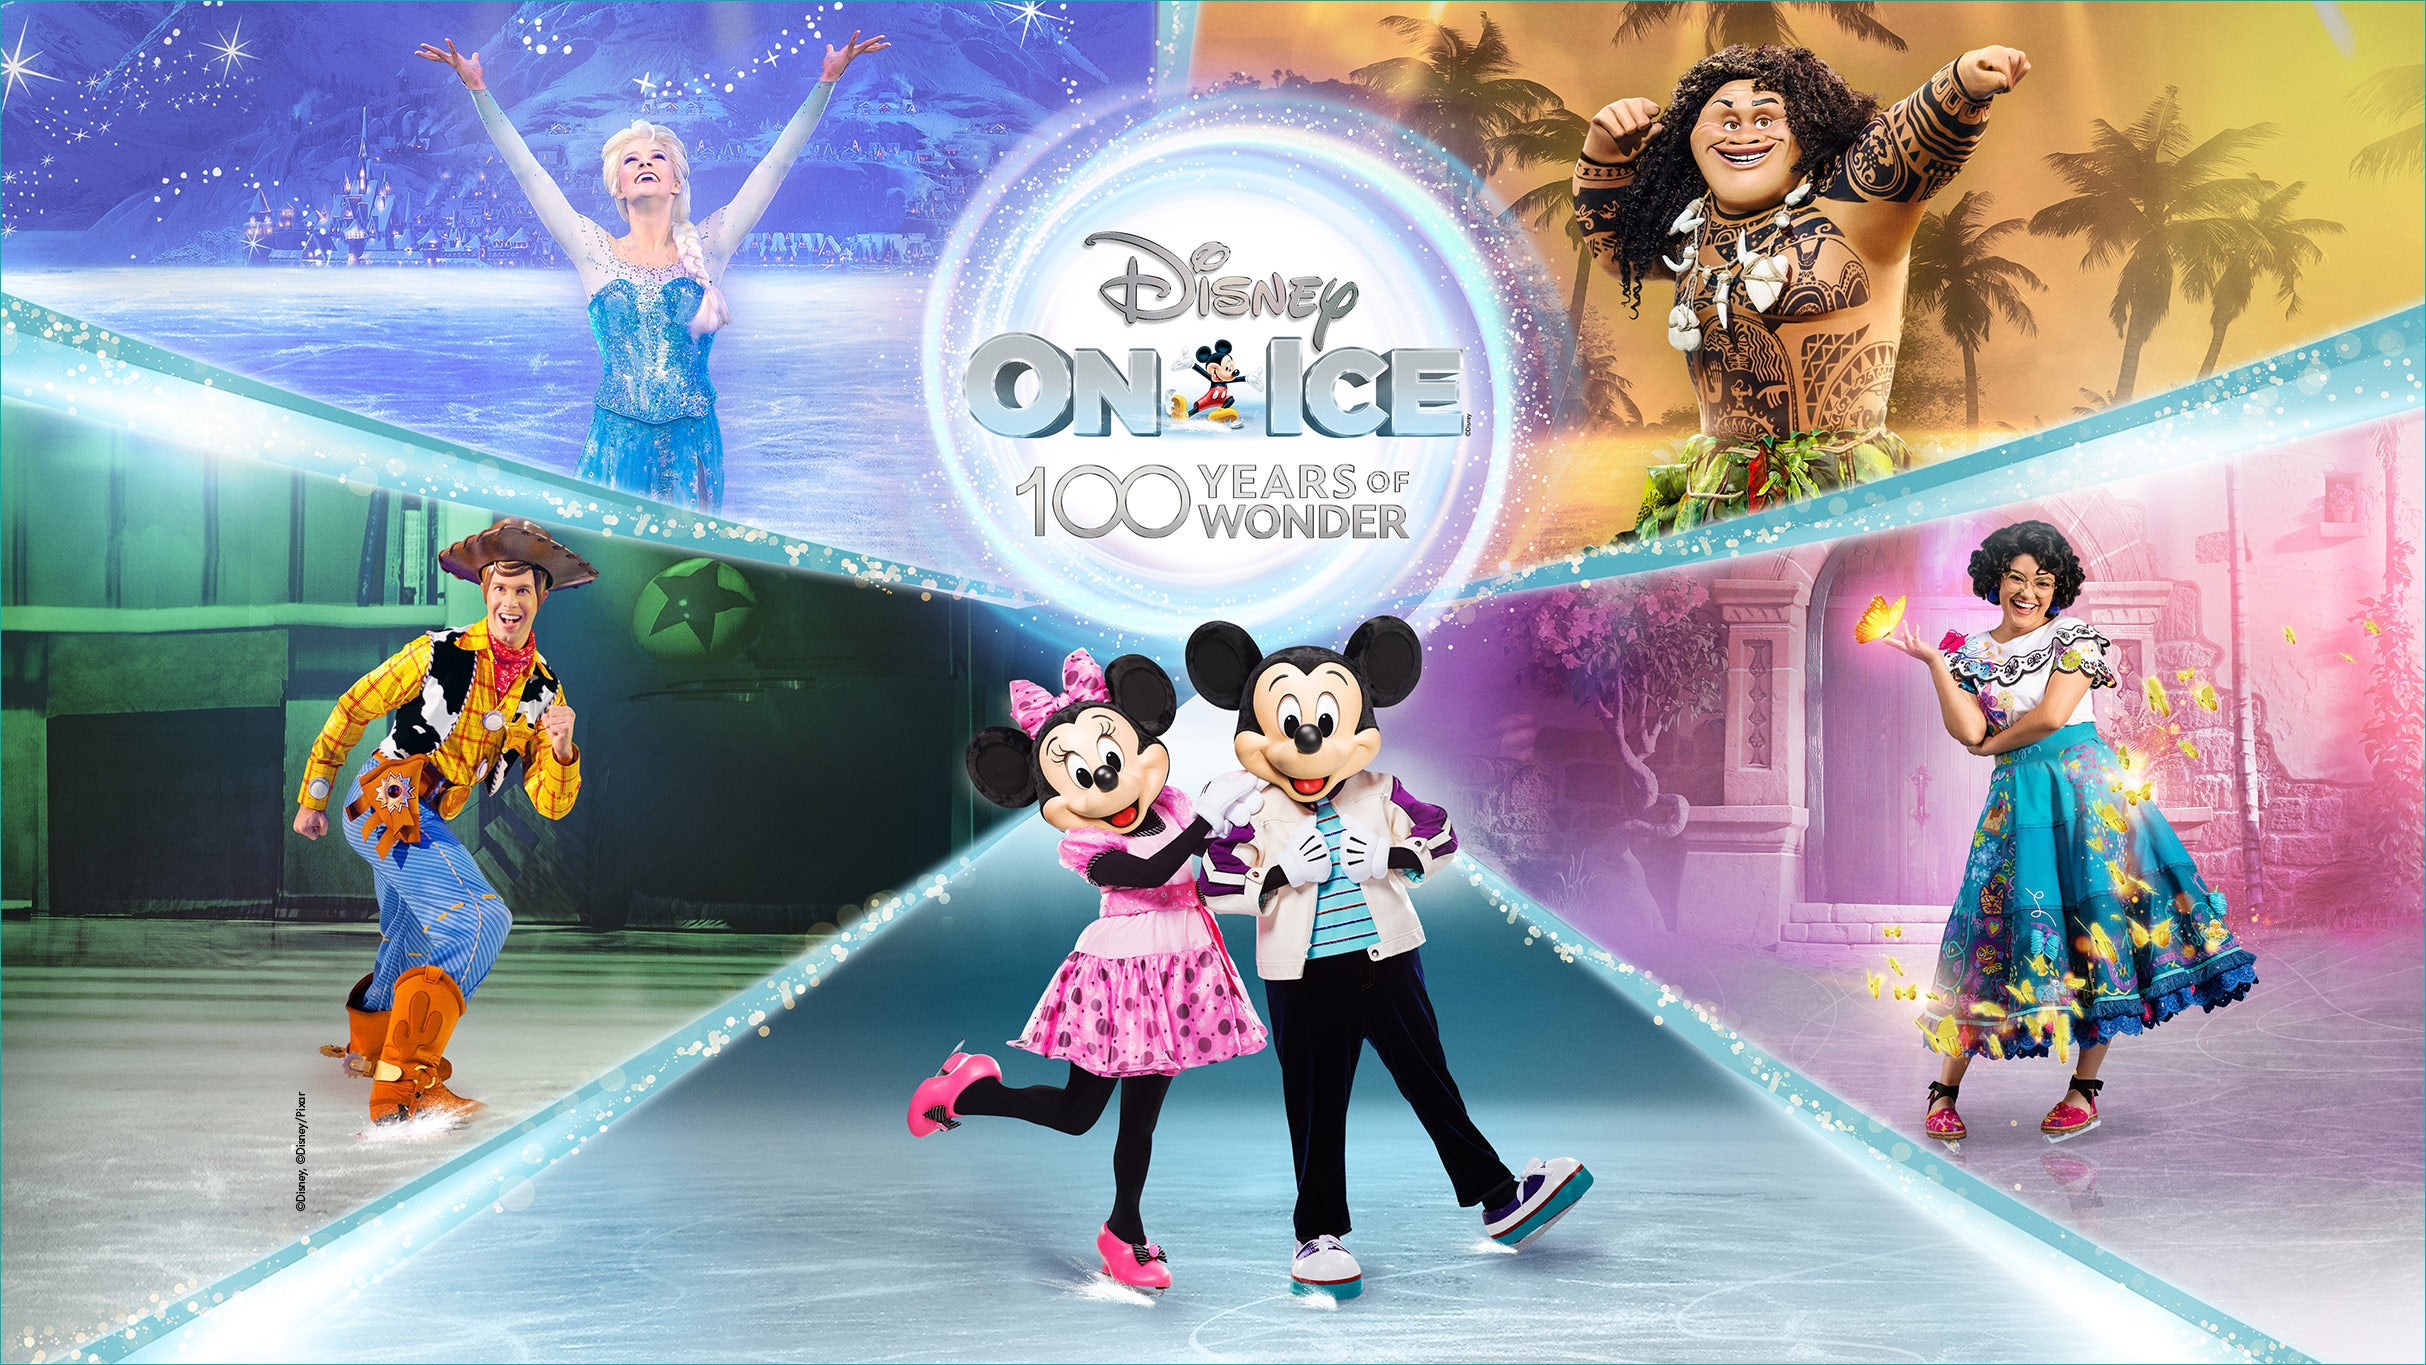 Disney on Ice presents 100 Years of Wonder in Exeter promo photo for Ticketmaster presale offer code